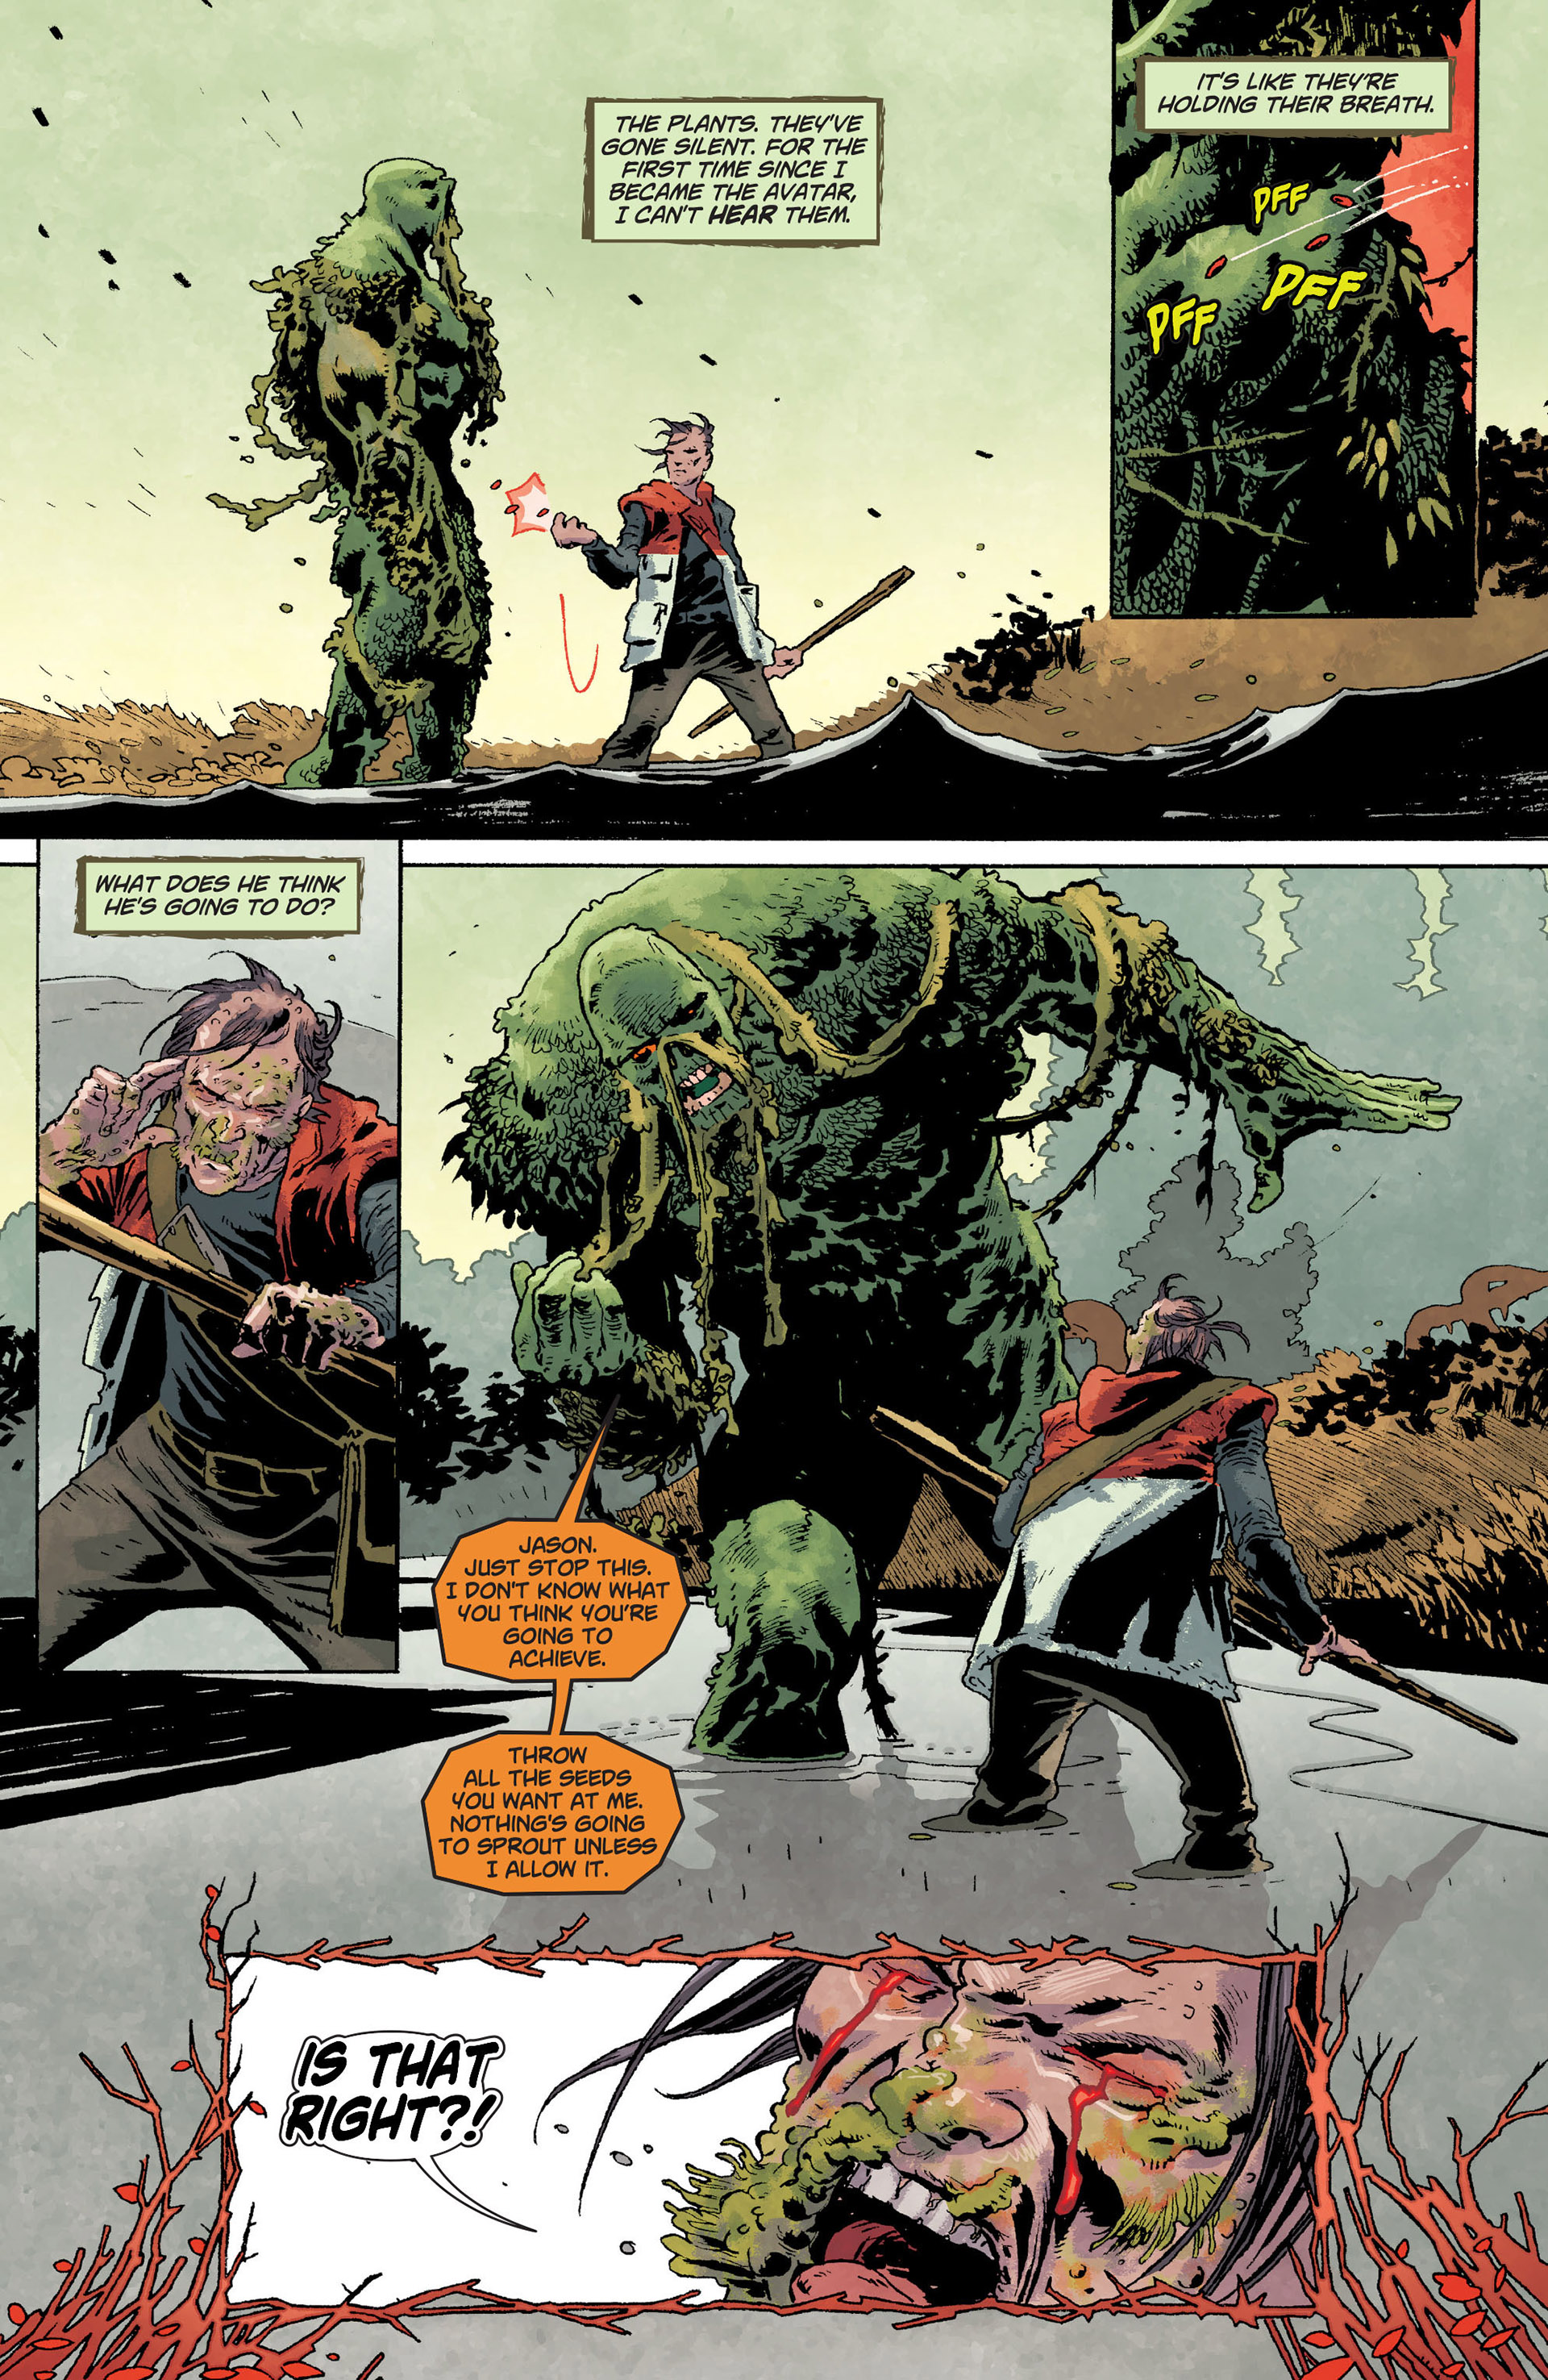 Swamp Thing (2011) 24 Page 14.